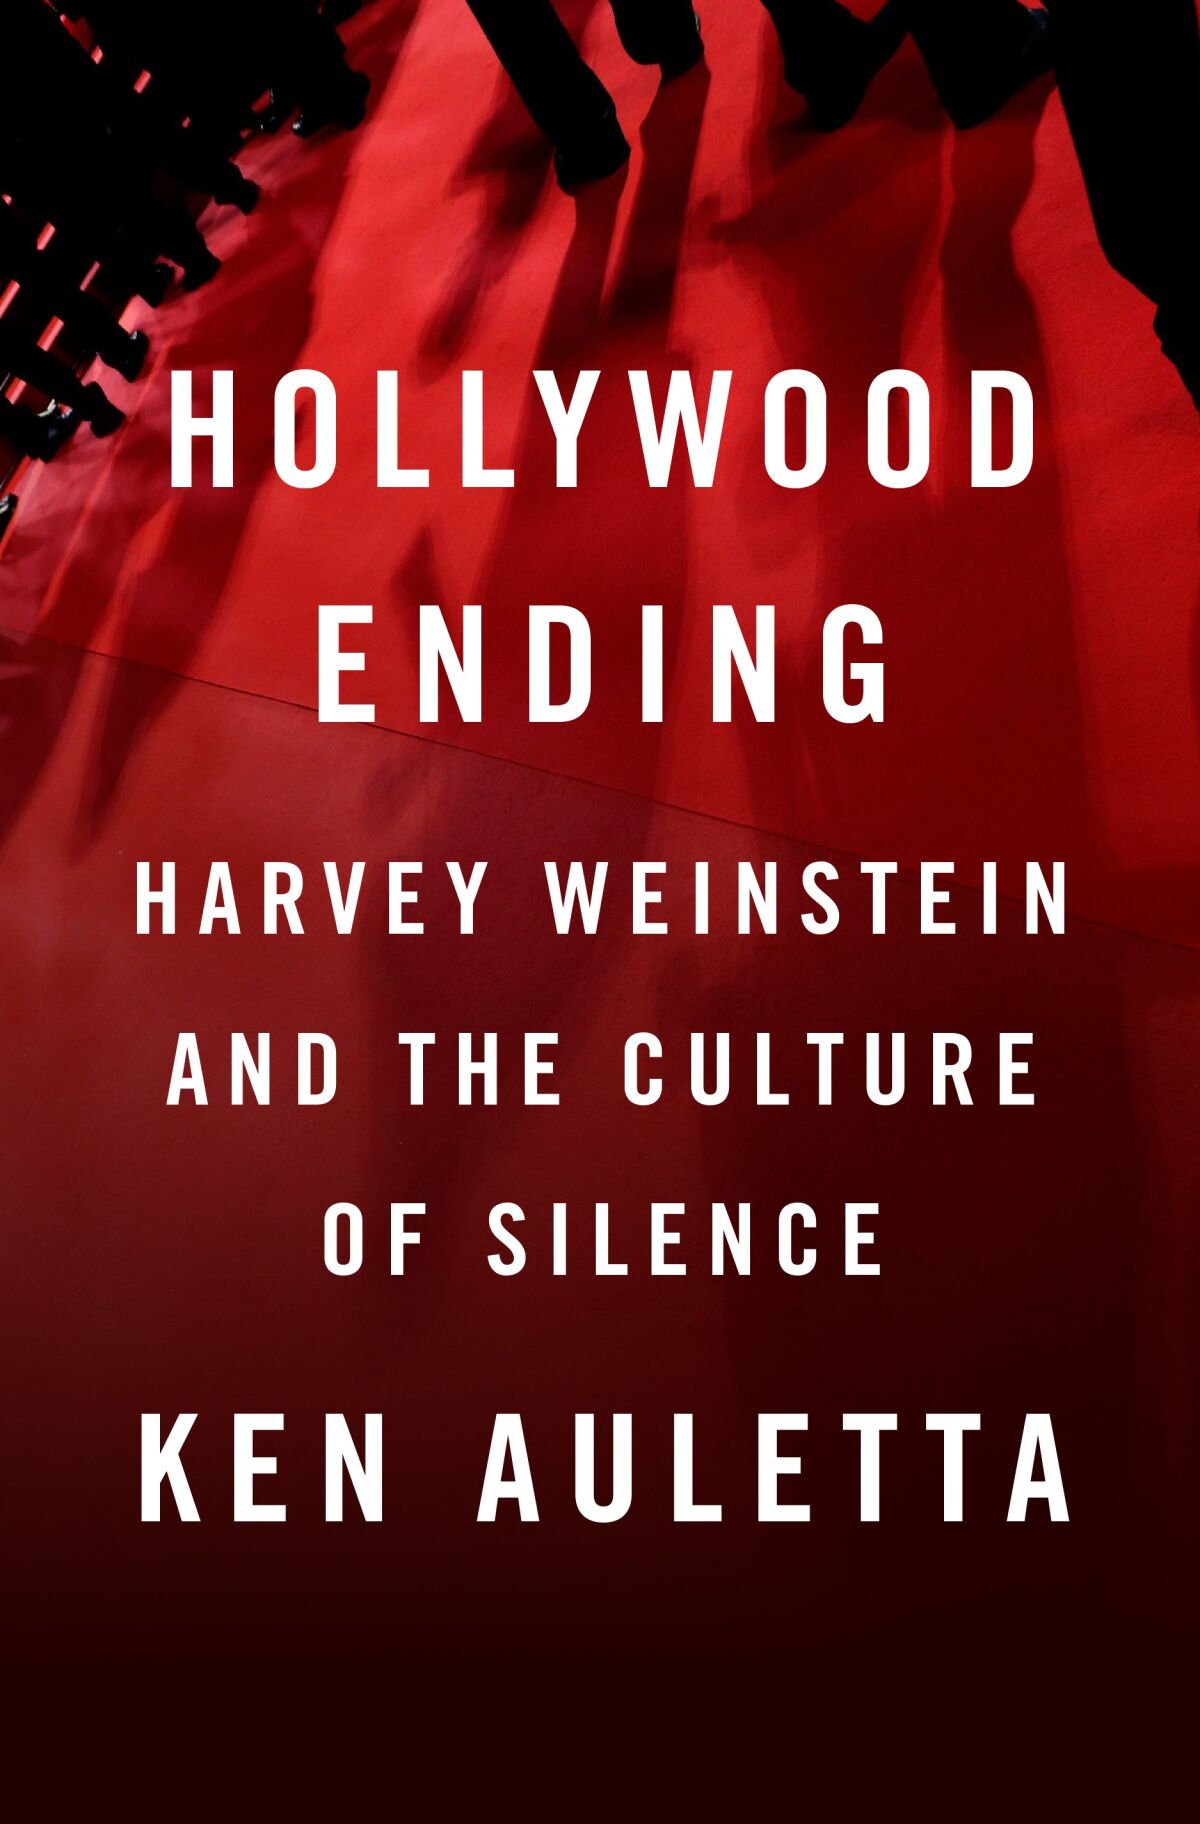 The book cover of "Hollywood Ending: Harvey Weinstein and the Culture of Silence" by Ken Auletta